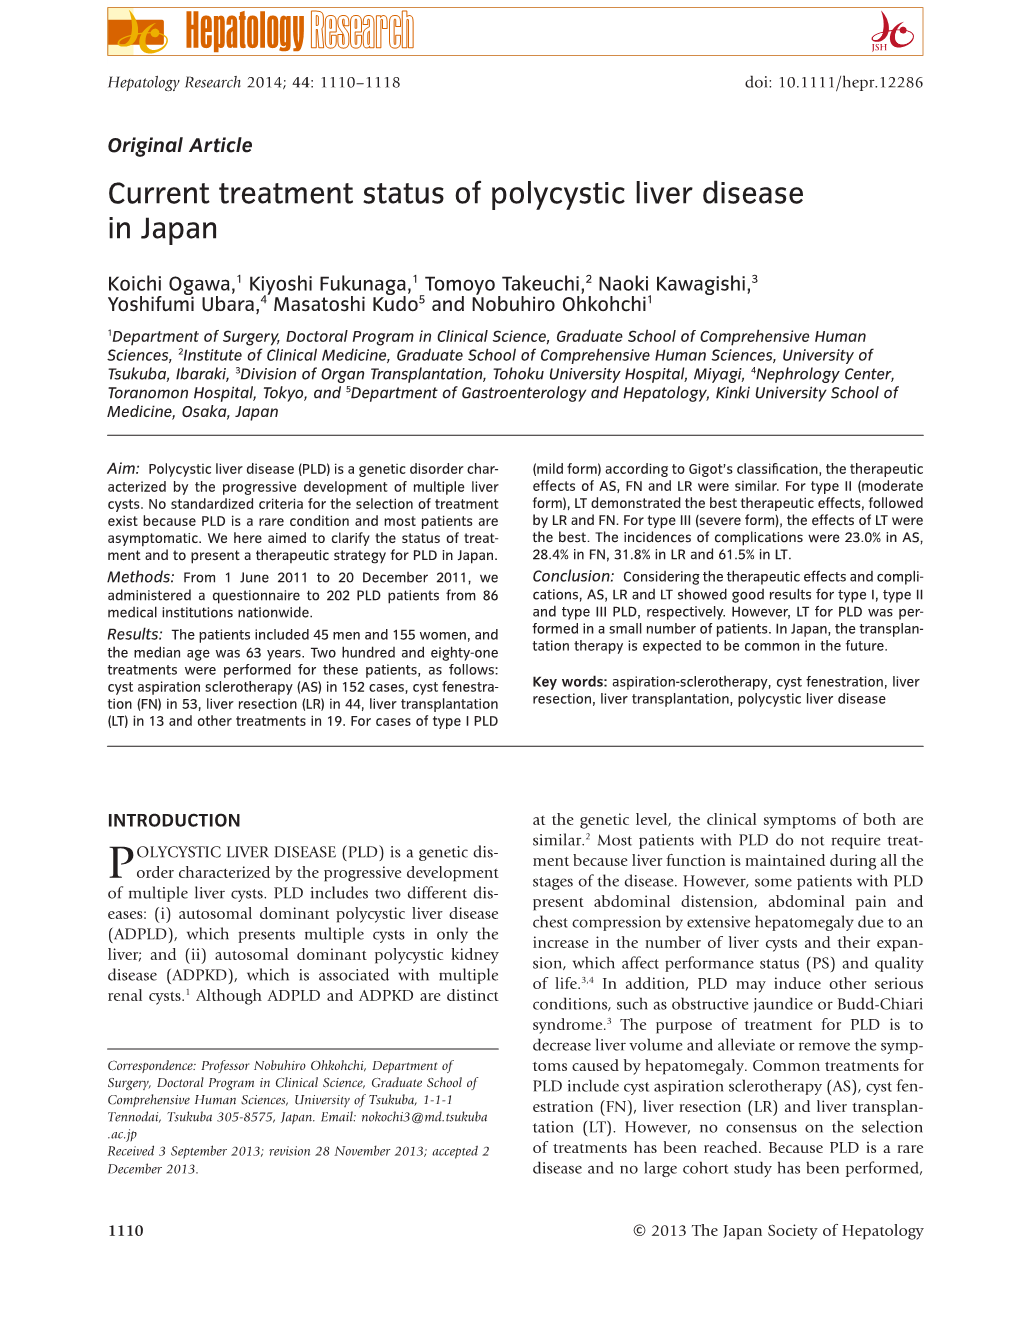 Current Treatment Status of Polycystic Liver Disease in Japan